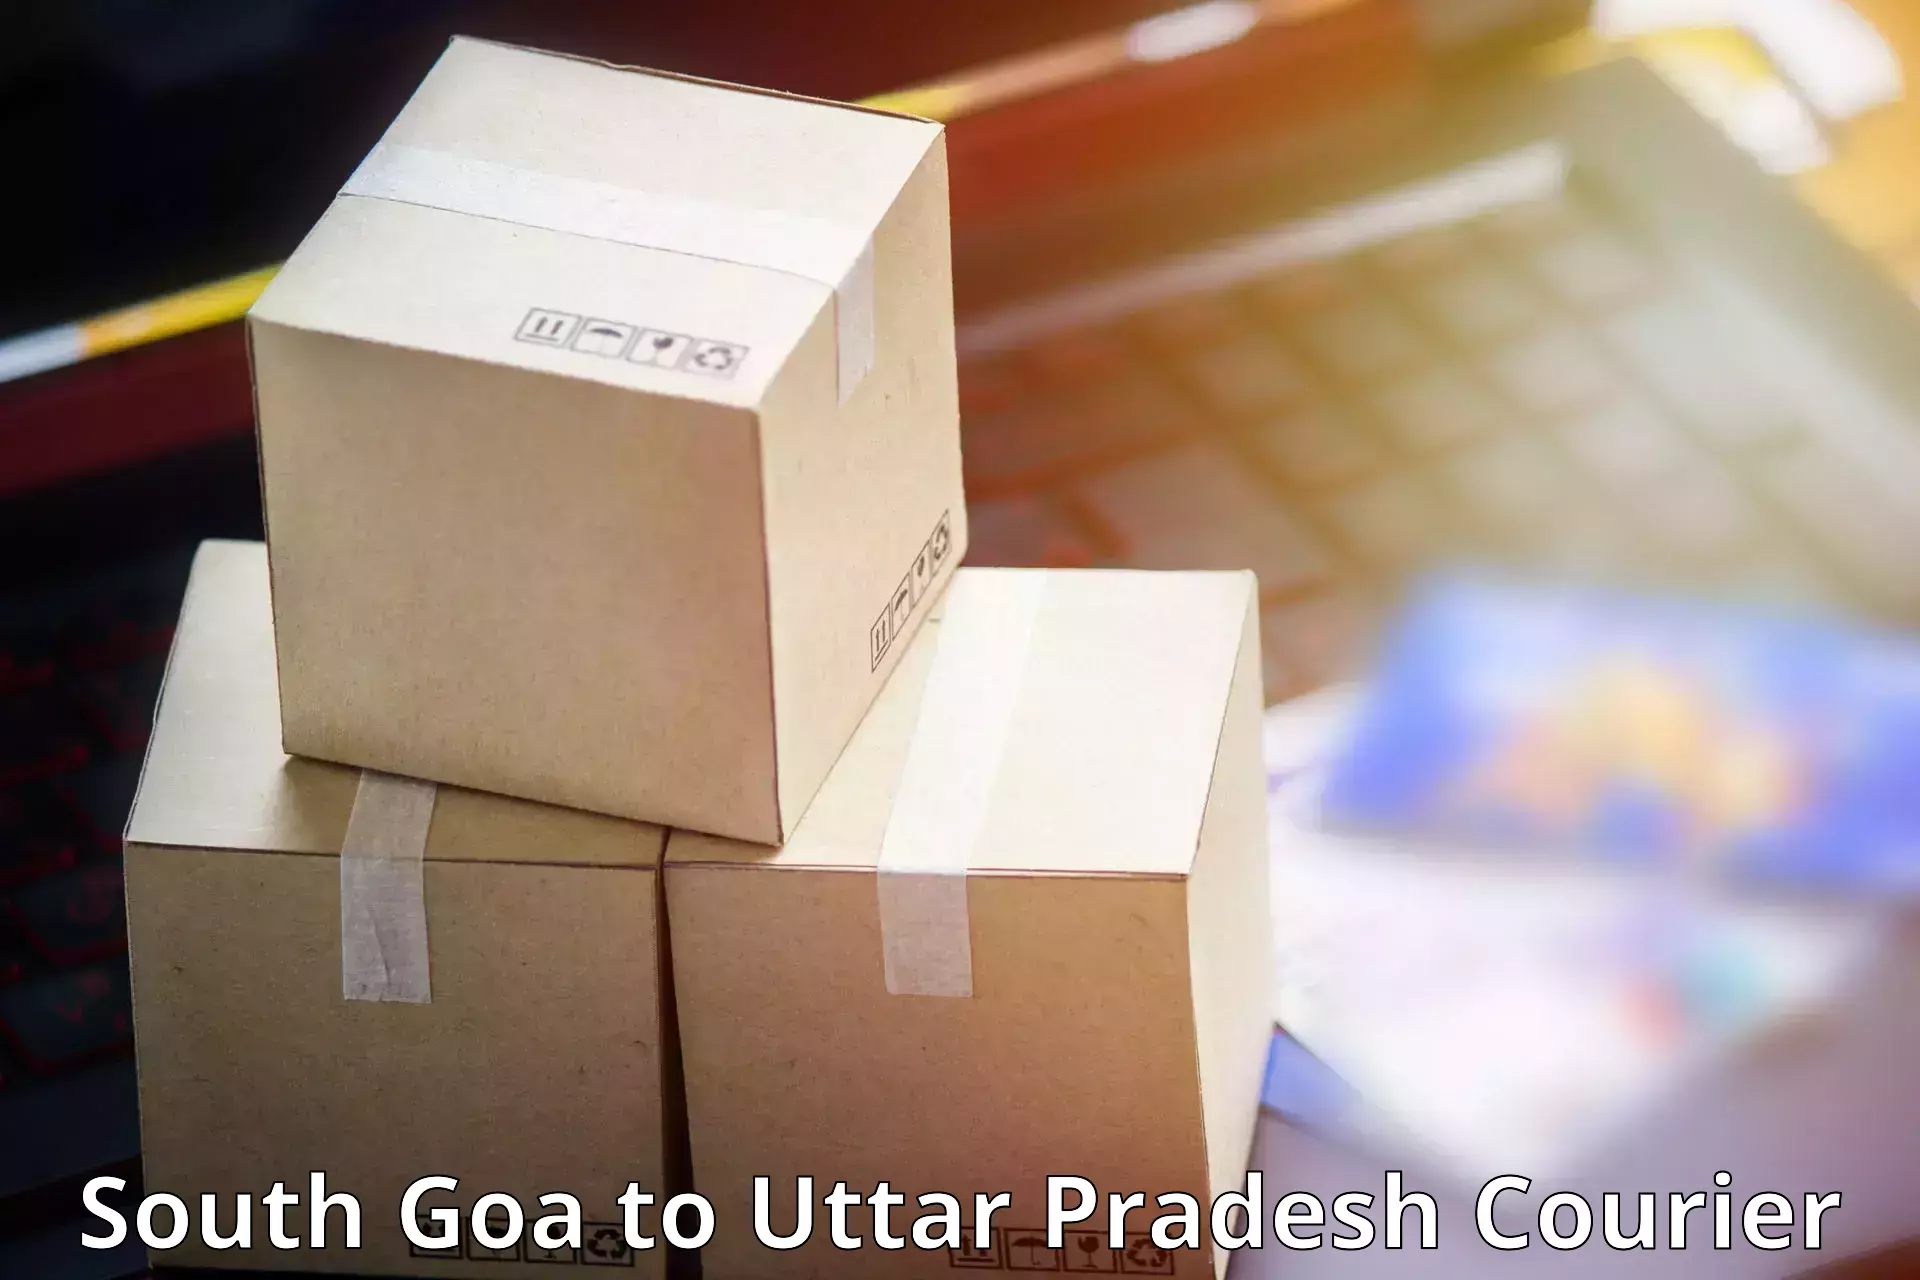 Parcel service for businesses South Goa to Kanth